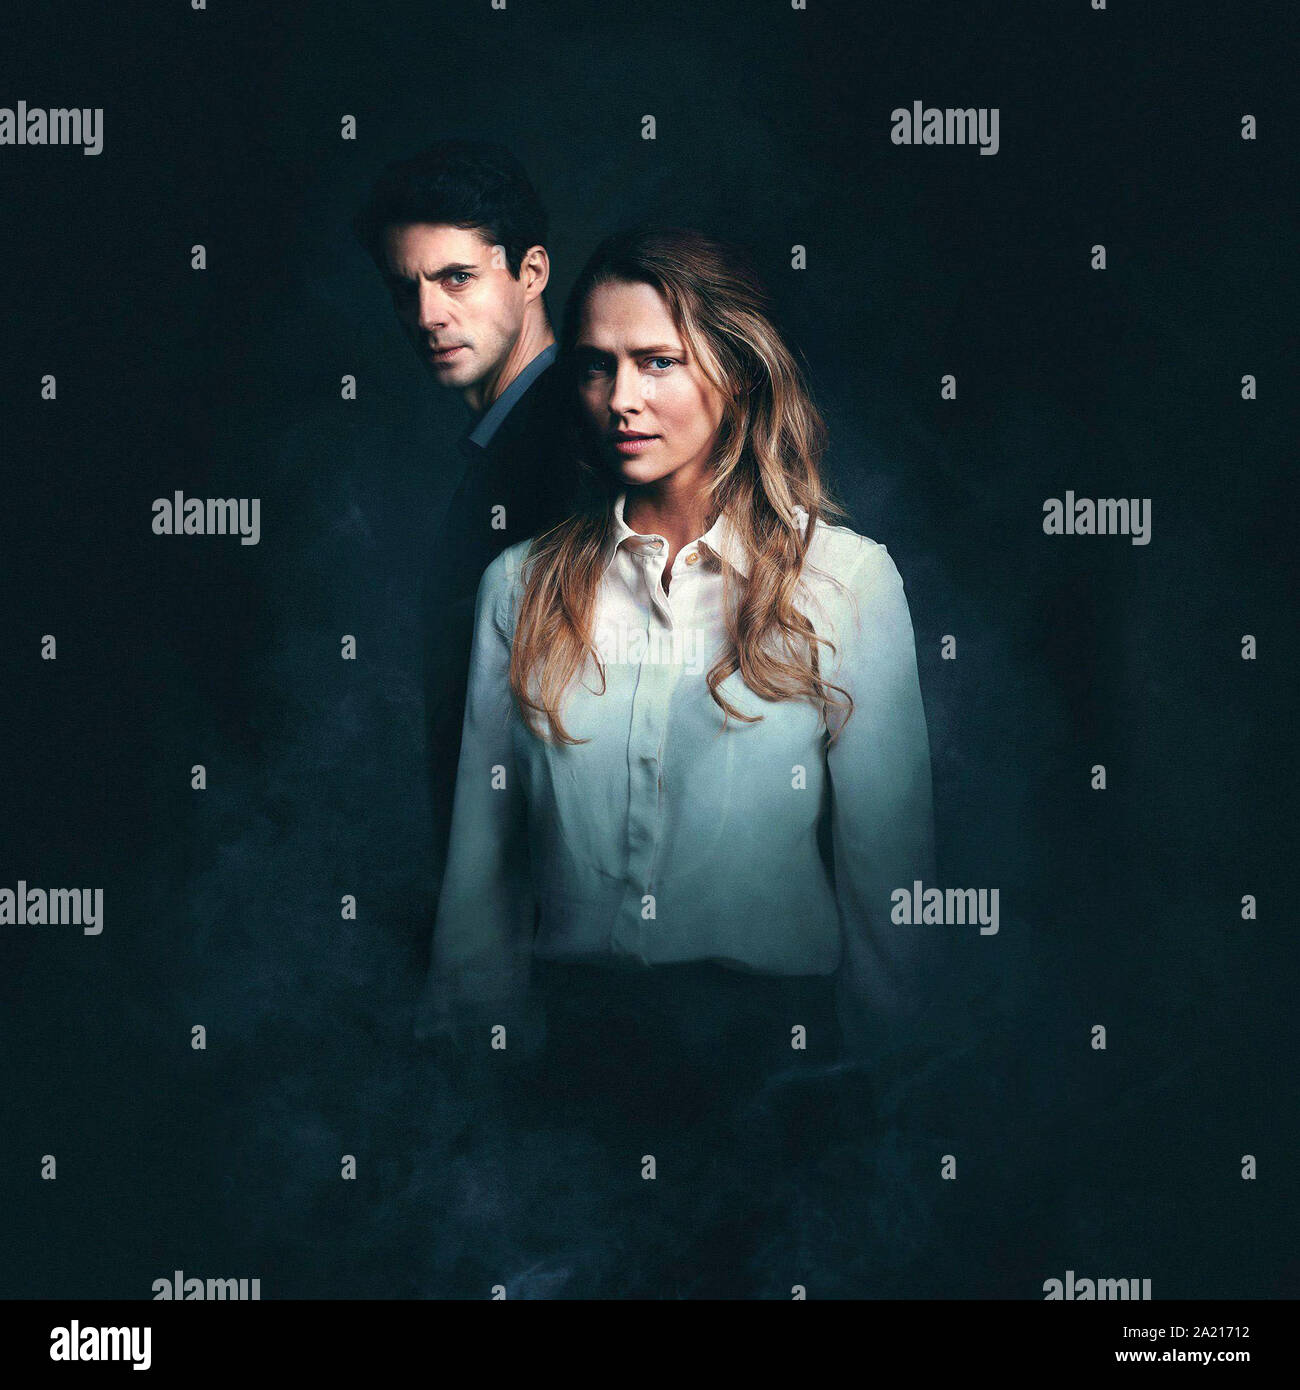 MATTHEW GOODE and TERESA PALMER in A DISCOVERY OF WITCHES (2018), directed by JUAN CARLOS MEDINA and FARREN BLACKBURN. Credit: AMC / Album Stock Photo